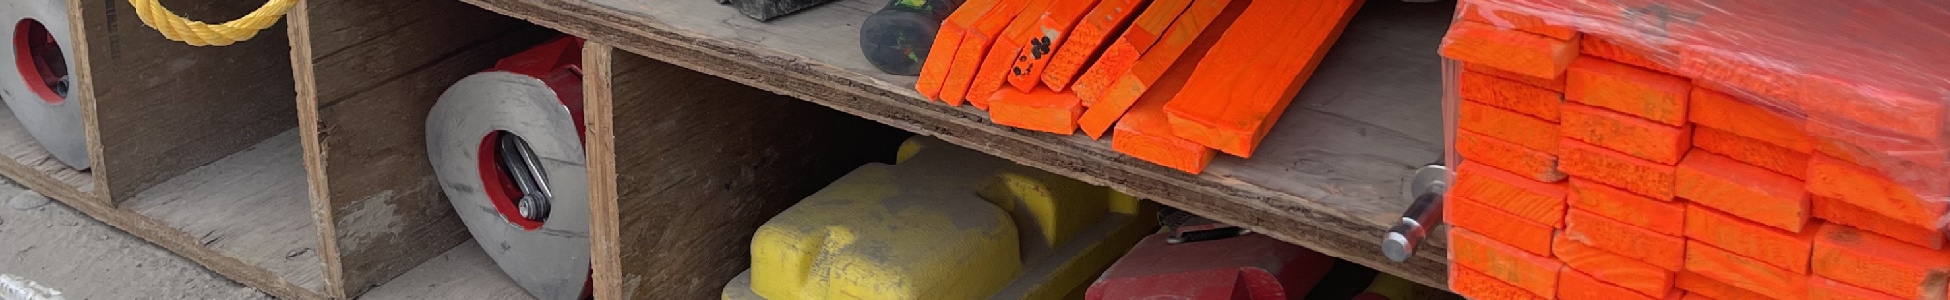 one of our construction surveyors in alberta took this photo of the surveying equipment in the back of the pickup truck